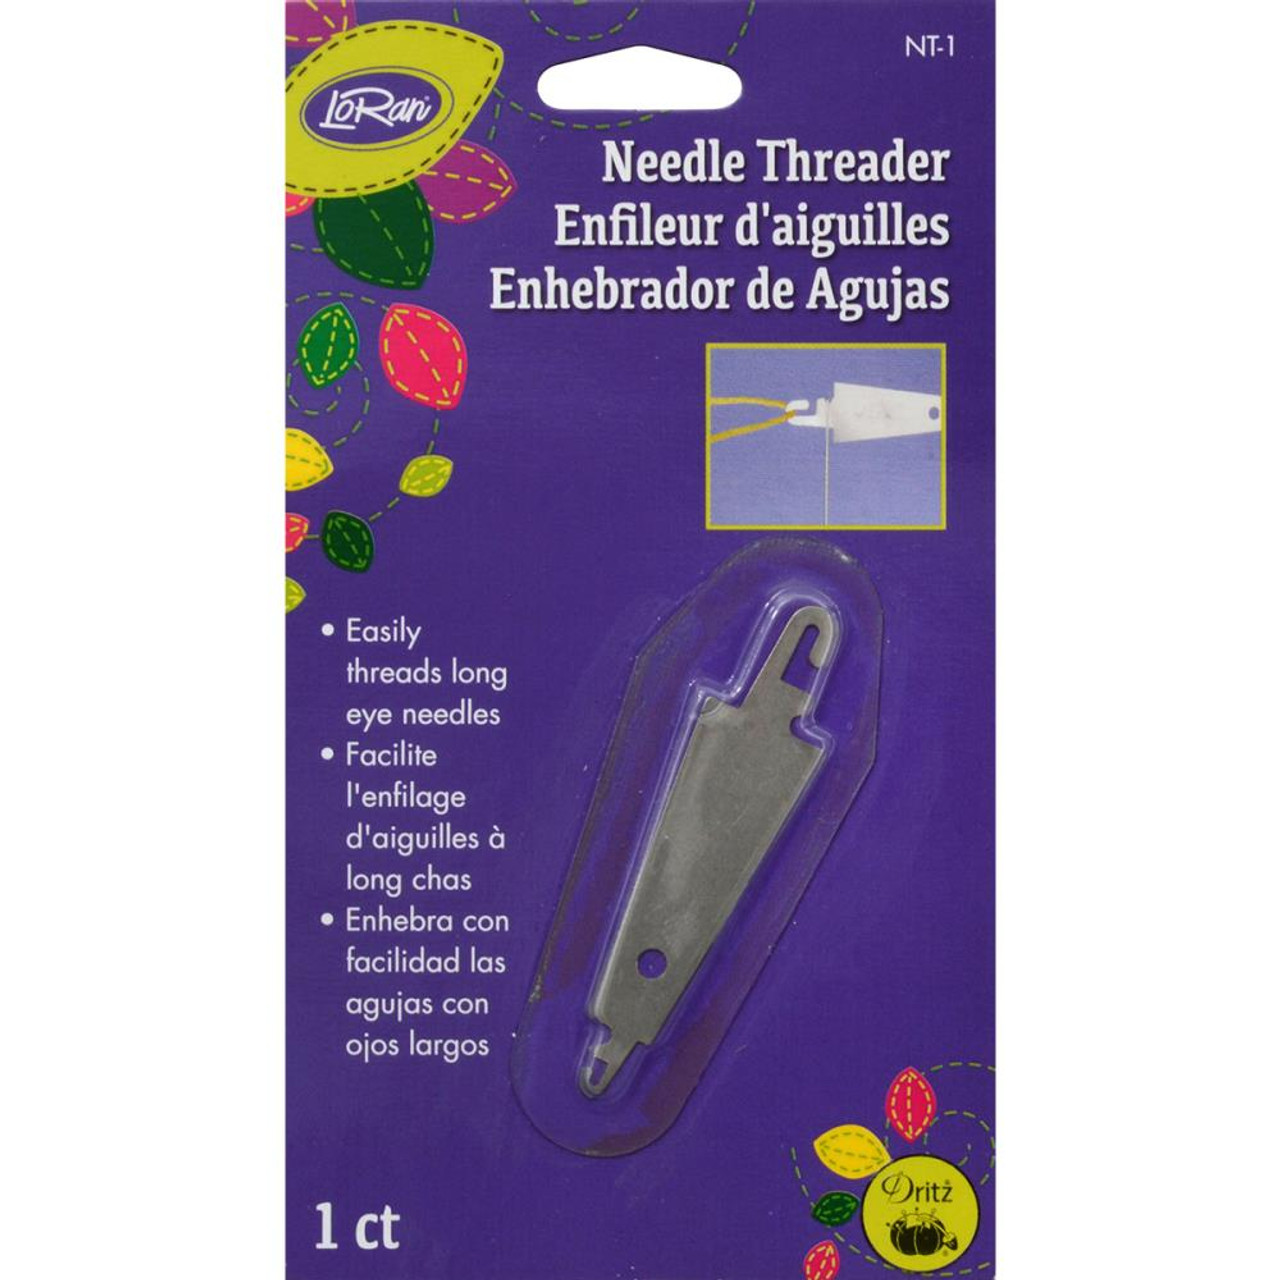 Clover Purple Desk Needle Threader - 051221507113 Quilt in a Day / Quilting  Notions